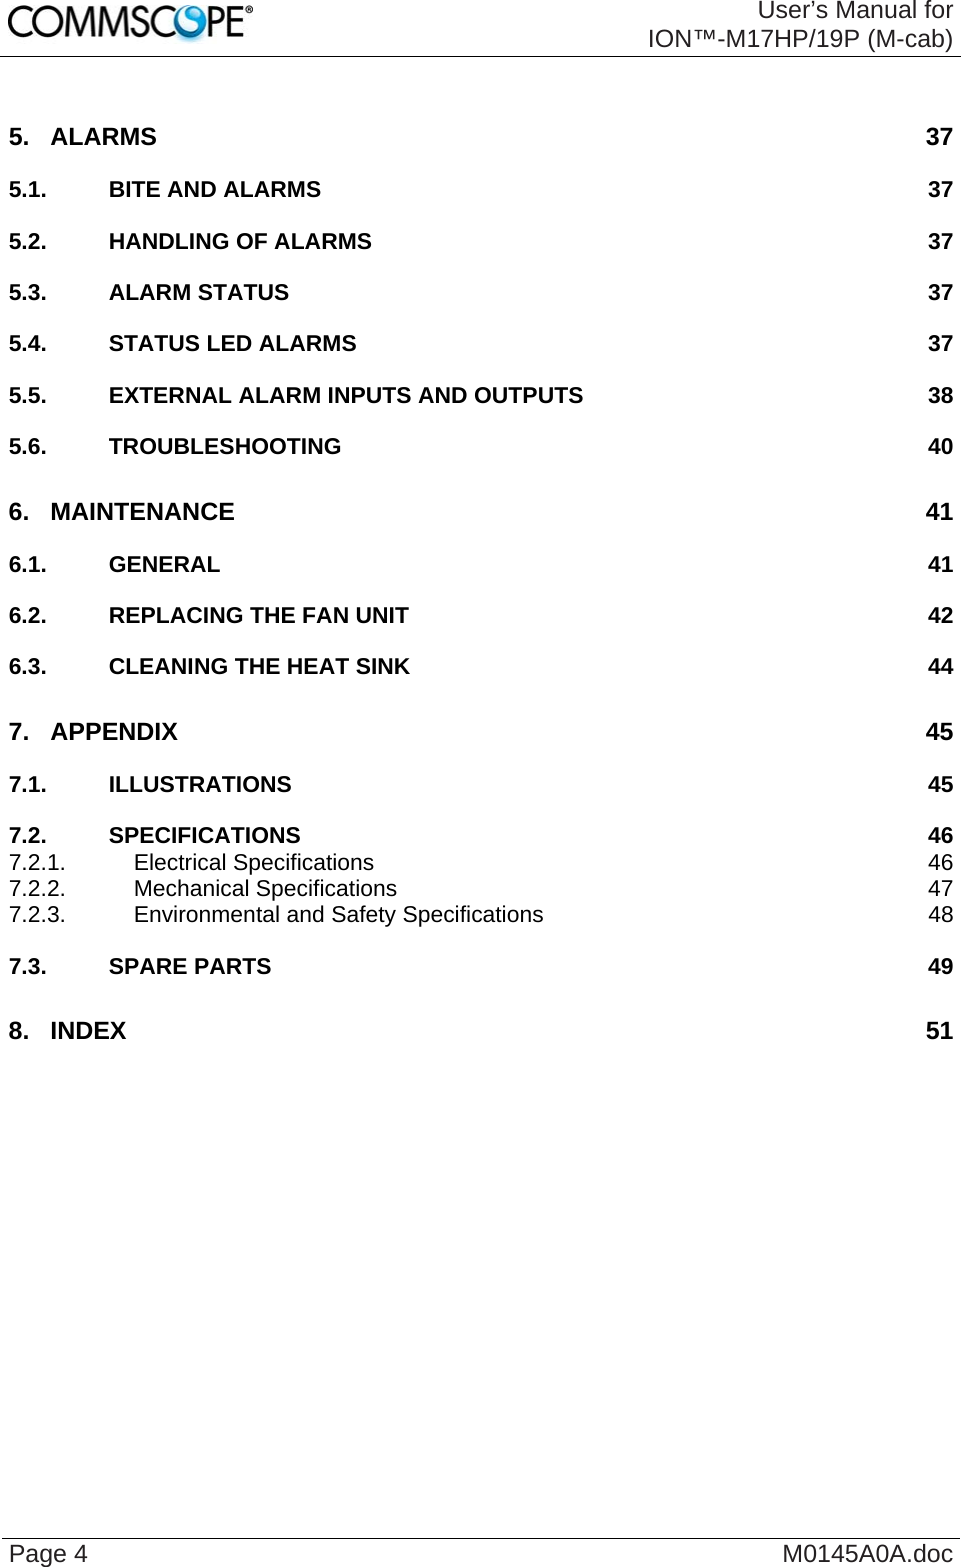  User’s Manual for ION™-M17HP/19P (M-cab) Page 4  M0145A0A.doc 5. ALARMS 37 5.1. BITE AND ALARMS  37 5.2. HANDLING OF ALARMS  37 5.3. ALARM STATUS  37 5.4. STATUS LED ALARMS  37 5.5. EXTERNAL ALARM INPUTS AND OUTPUTS  38 5.6. TROUBLESHOOTING 40 6. MAINTENANCE 41 6.1. GENERAL 41 6.2. REPLACING THE FAN UNIT  42 6.3. CLEANING THE HEAT SINK  44 7. APPENDIX 45 7.1. ILLUSTRATIONS 45 7.2. SPECIFICATIONS 46 7.2.1. Electrical Specifications  46 7.2.2. Mechanical Specifications  47 7.2.3. Environmental and Safety Specifications  48 7.3. SPARE PARTS  49 8. INDEX 51  